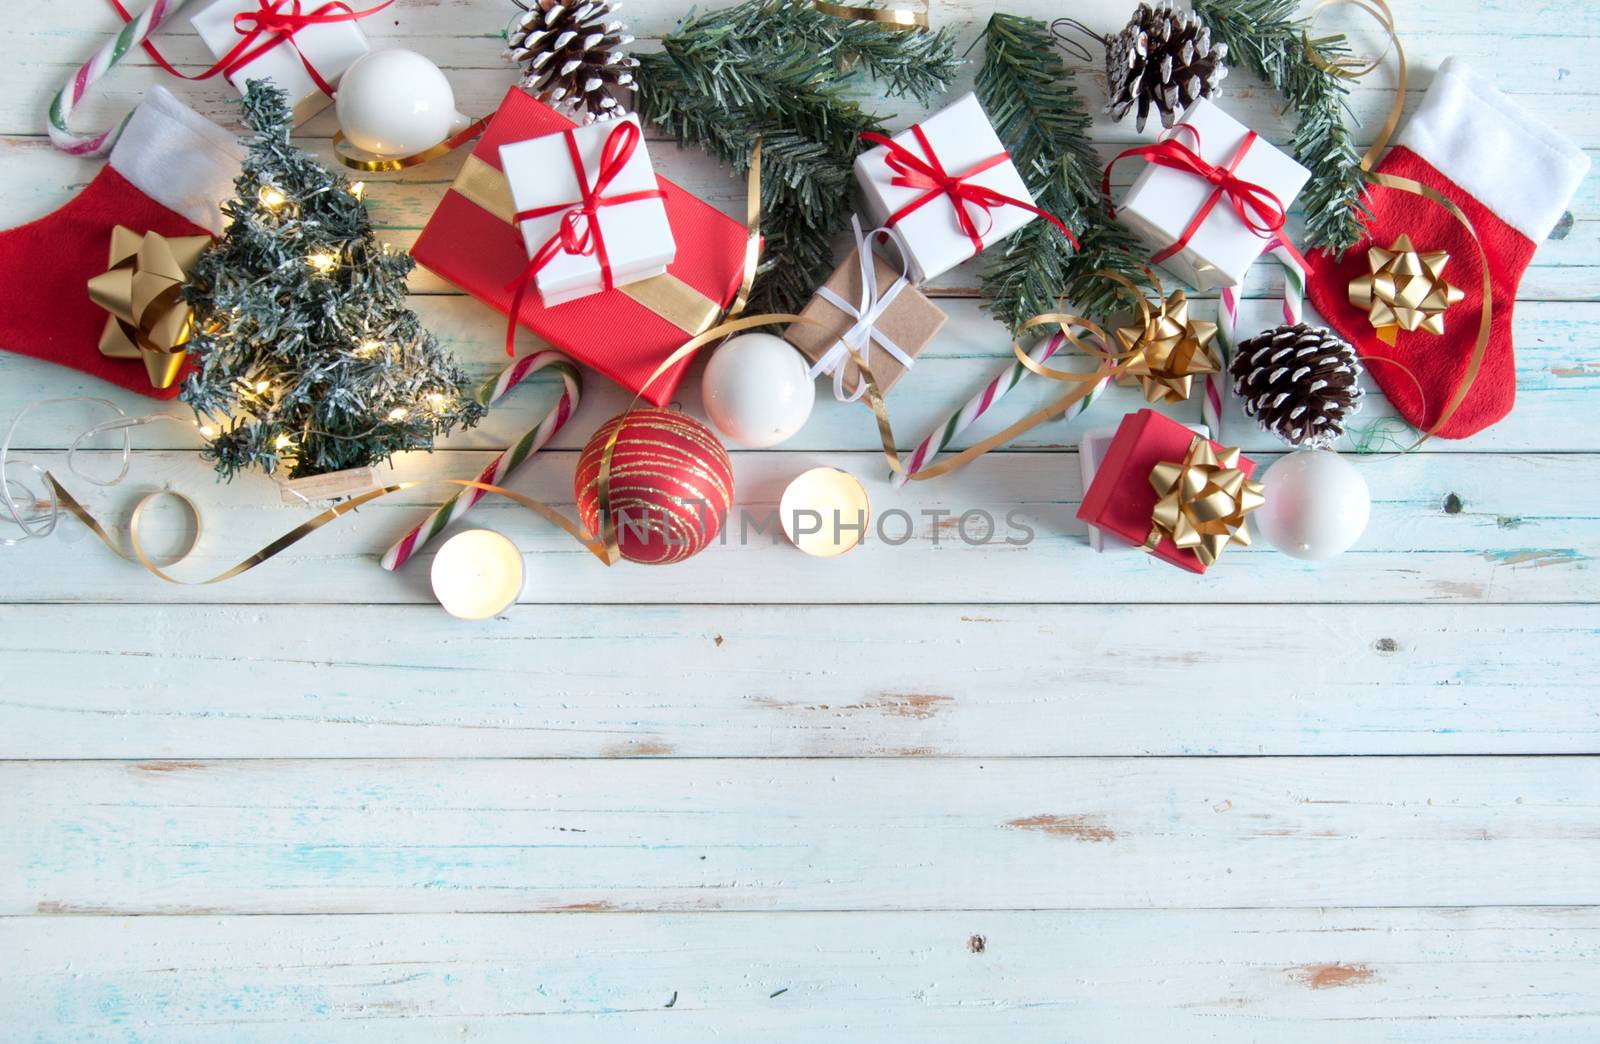 Christmas gifts and decorations with candles on a wooden background